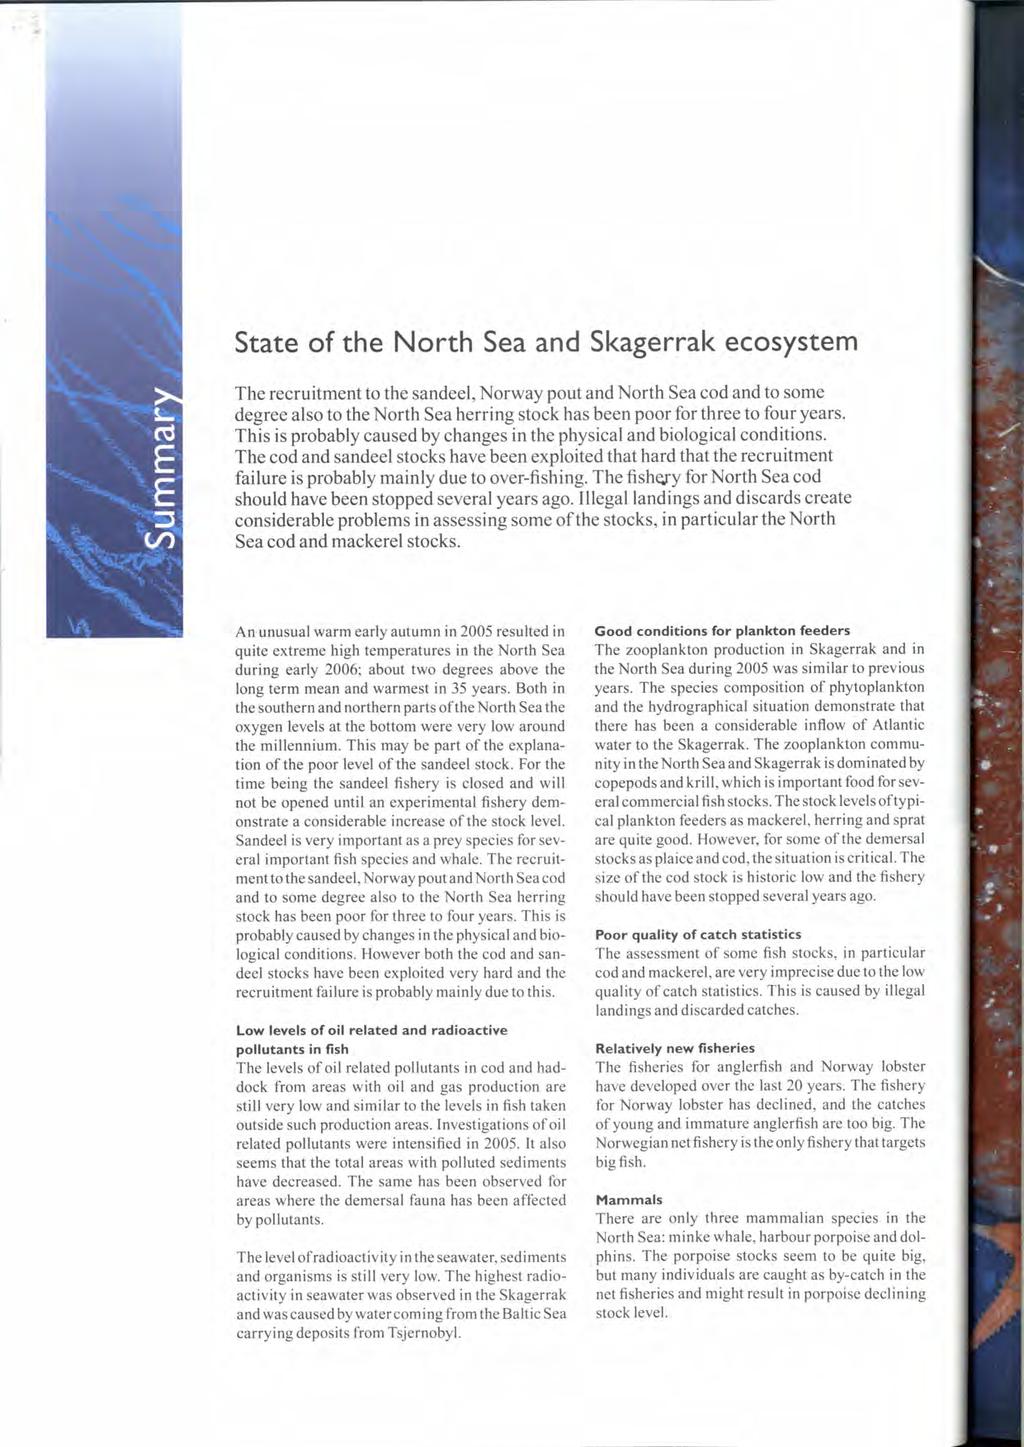 State of the North Sea and Skagerrak ecosystem The recruitment to the sandeel, Norway pout and North Sea cod and to some degree als to the North Sea herring stock has been poor for three to four